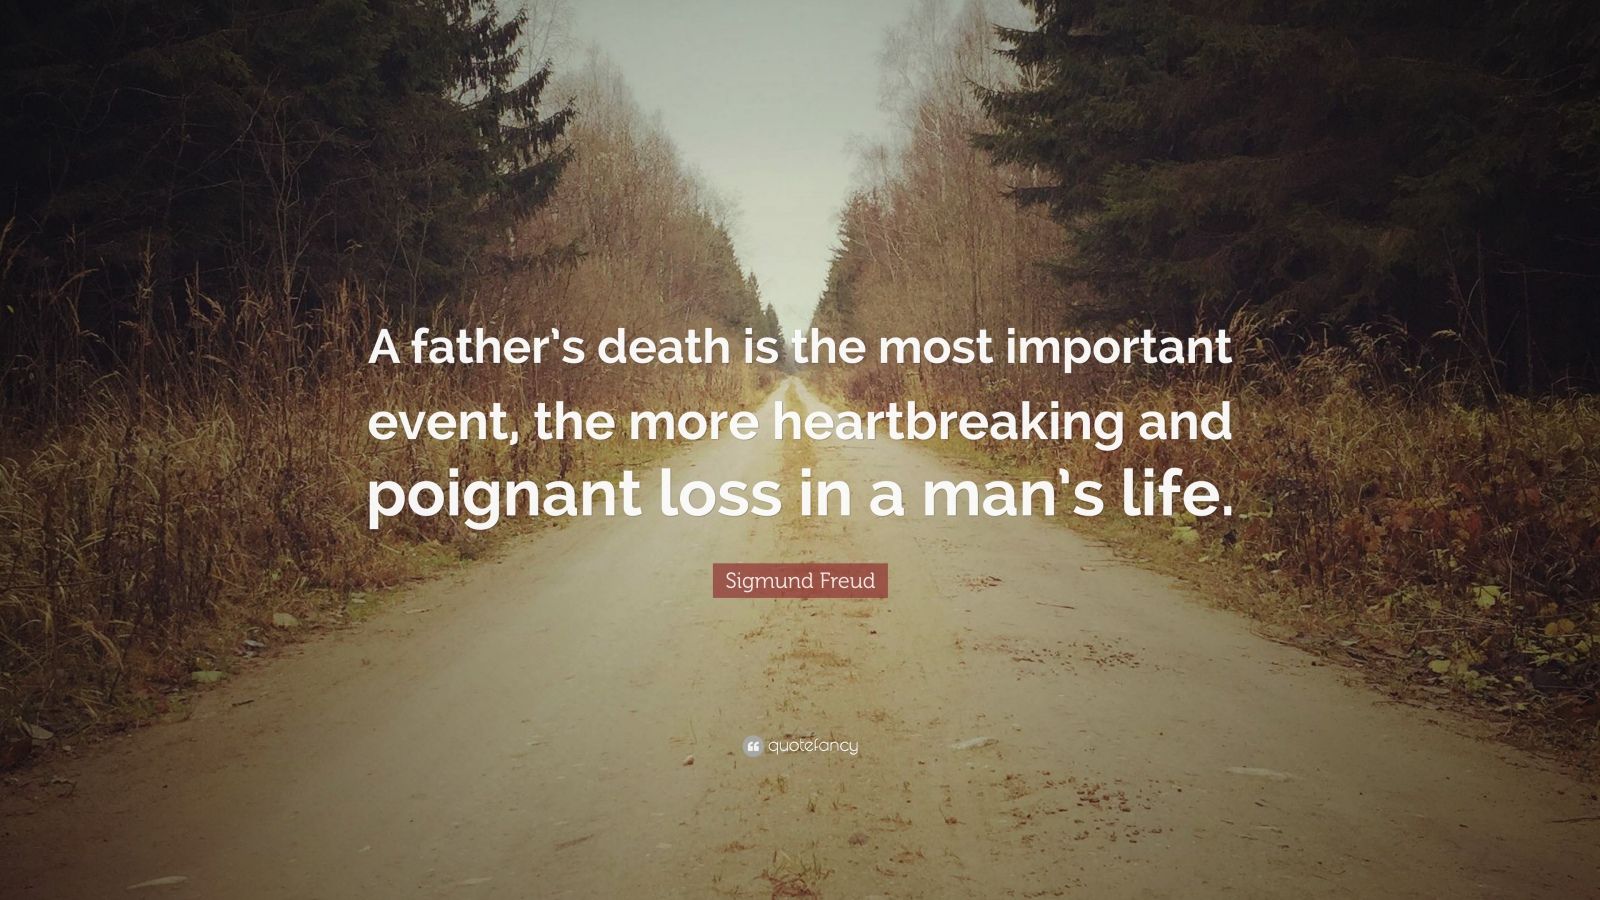 Sigmund Freud Quote: “A father’s death is the most important event, the